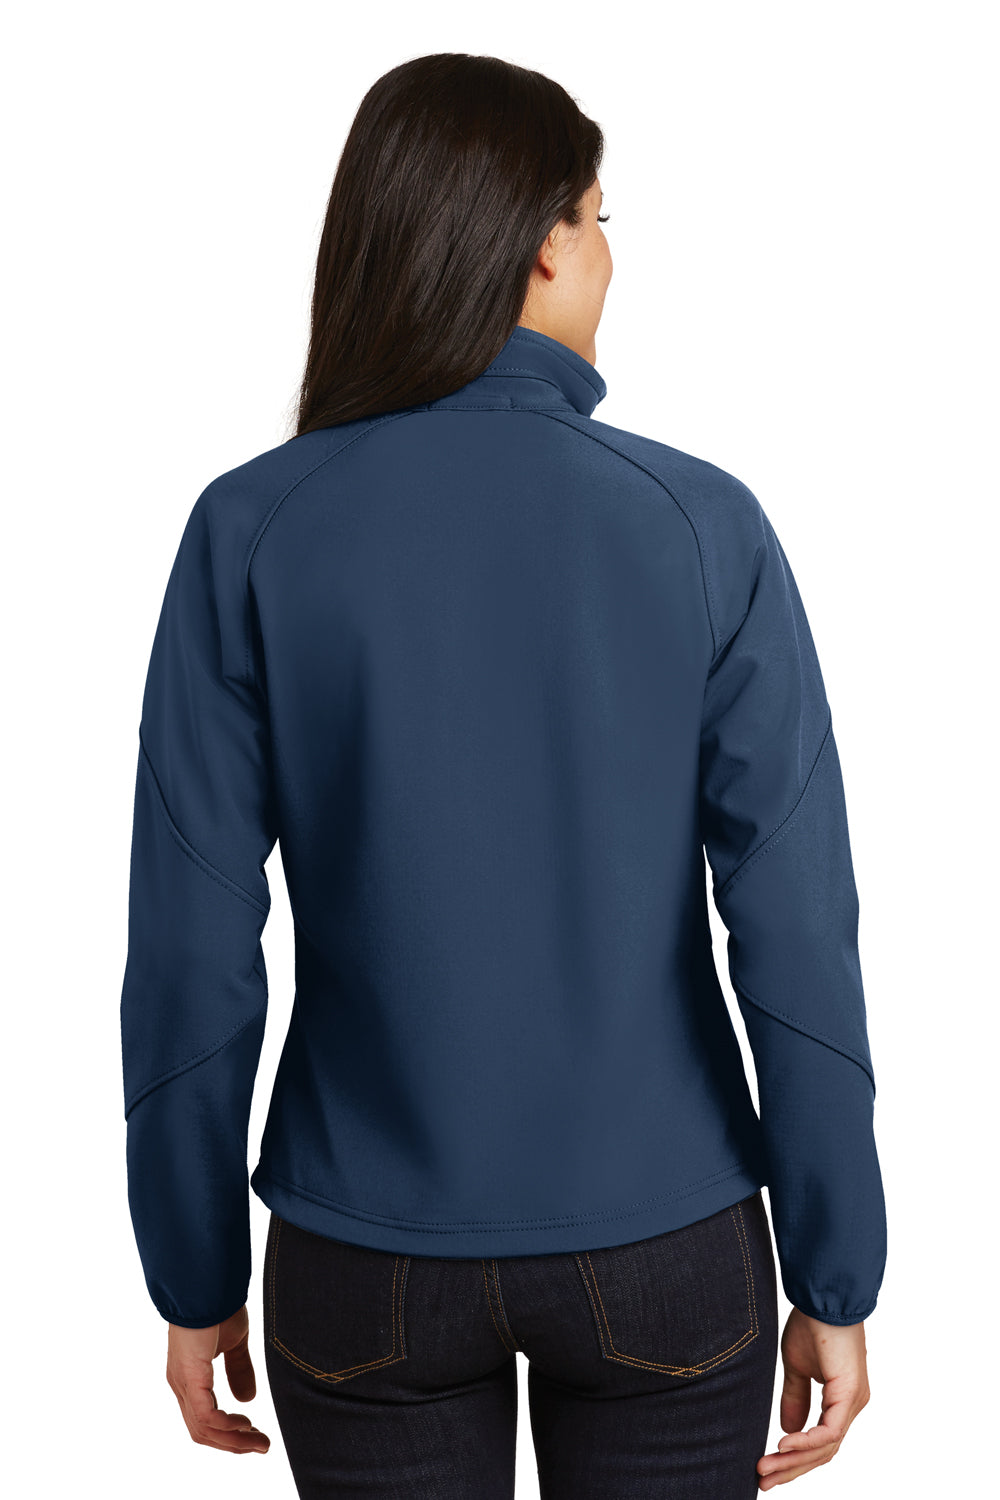 Port Authority L705 Womens Wind & Water Resistant Full Zip Jacket Insignia Blue Back